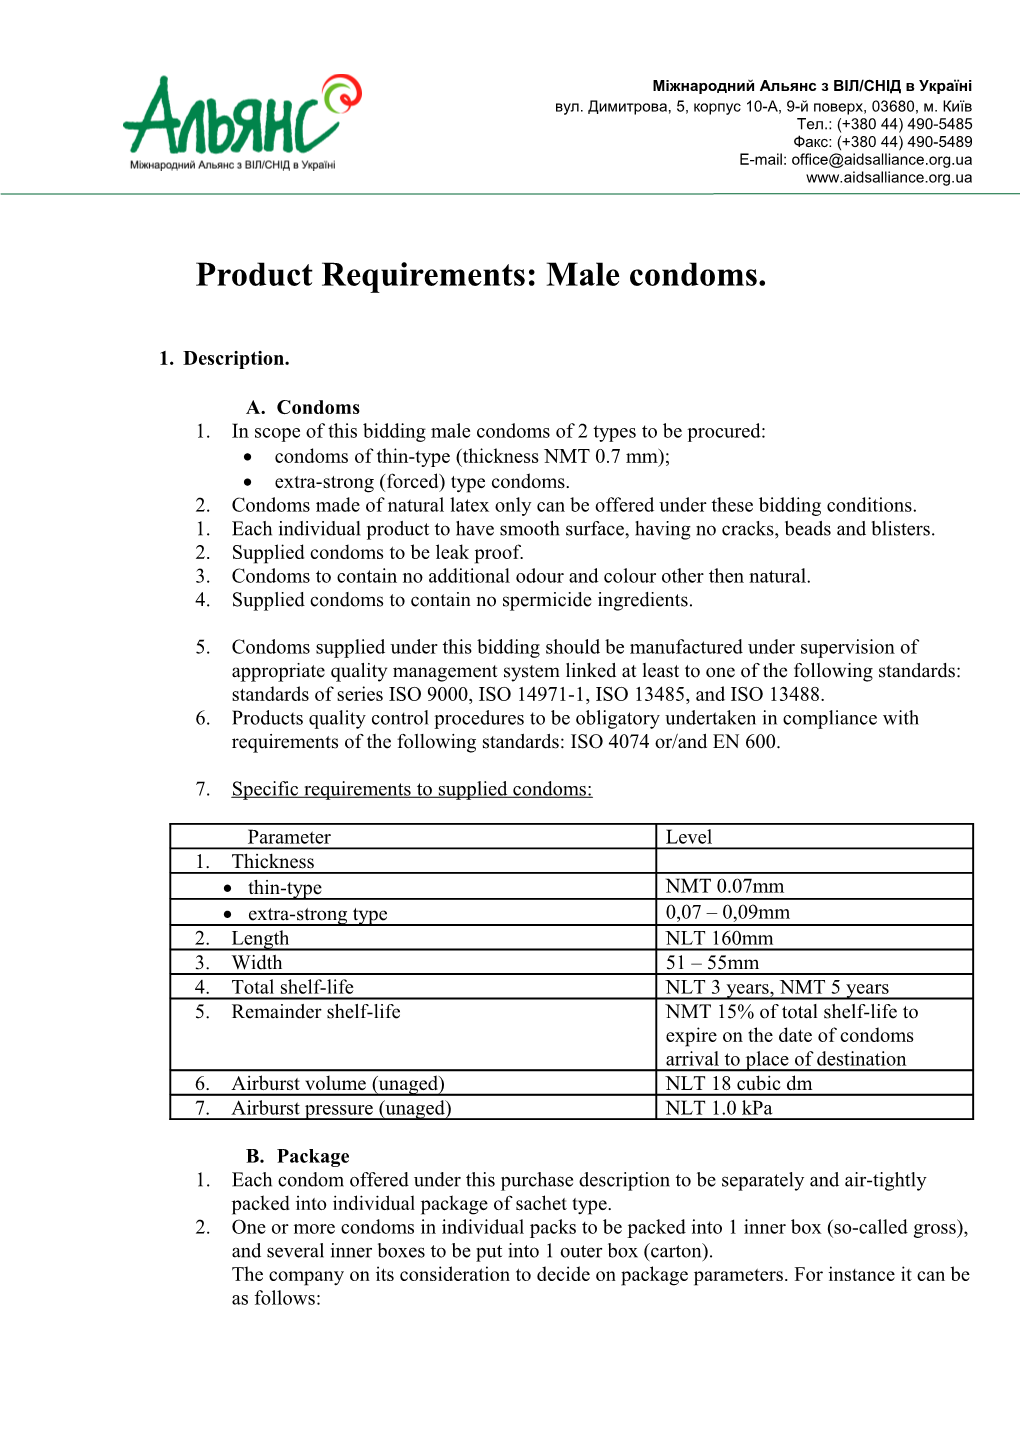 Product Requirements: Male Condoms